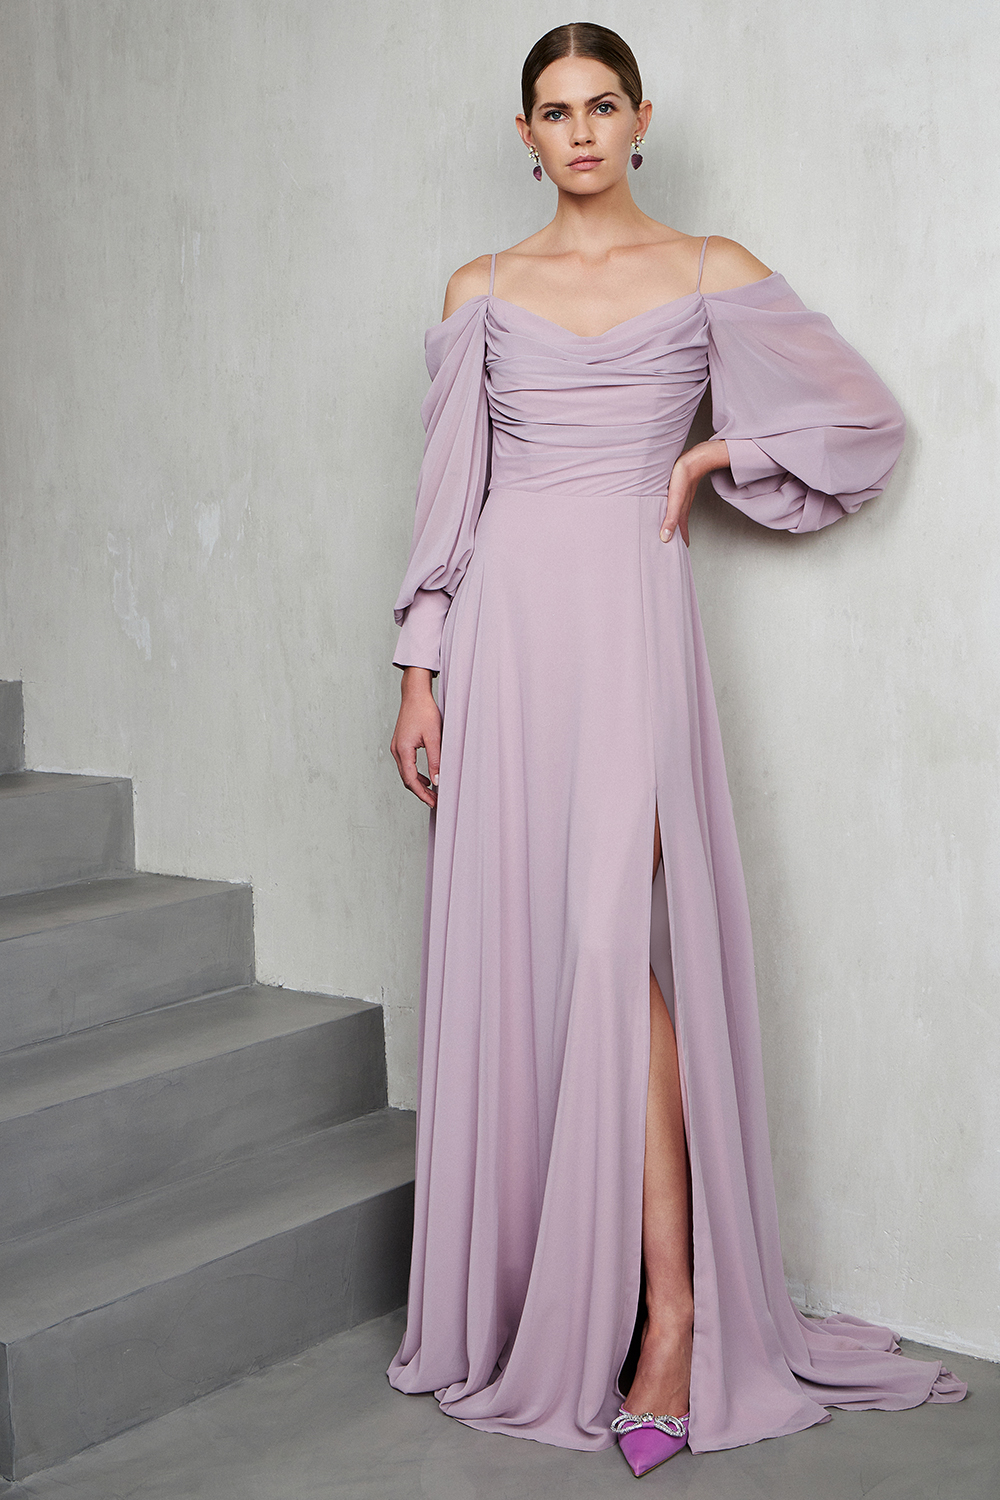 Cocktail Dresses / Long cocktail dress with chiffon fabric and long sleeves